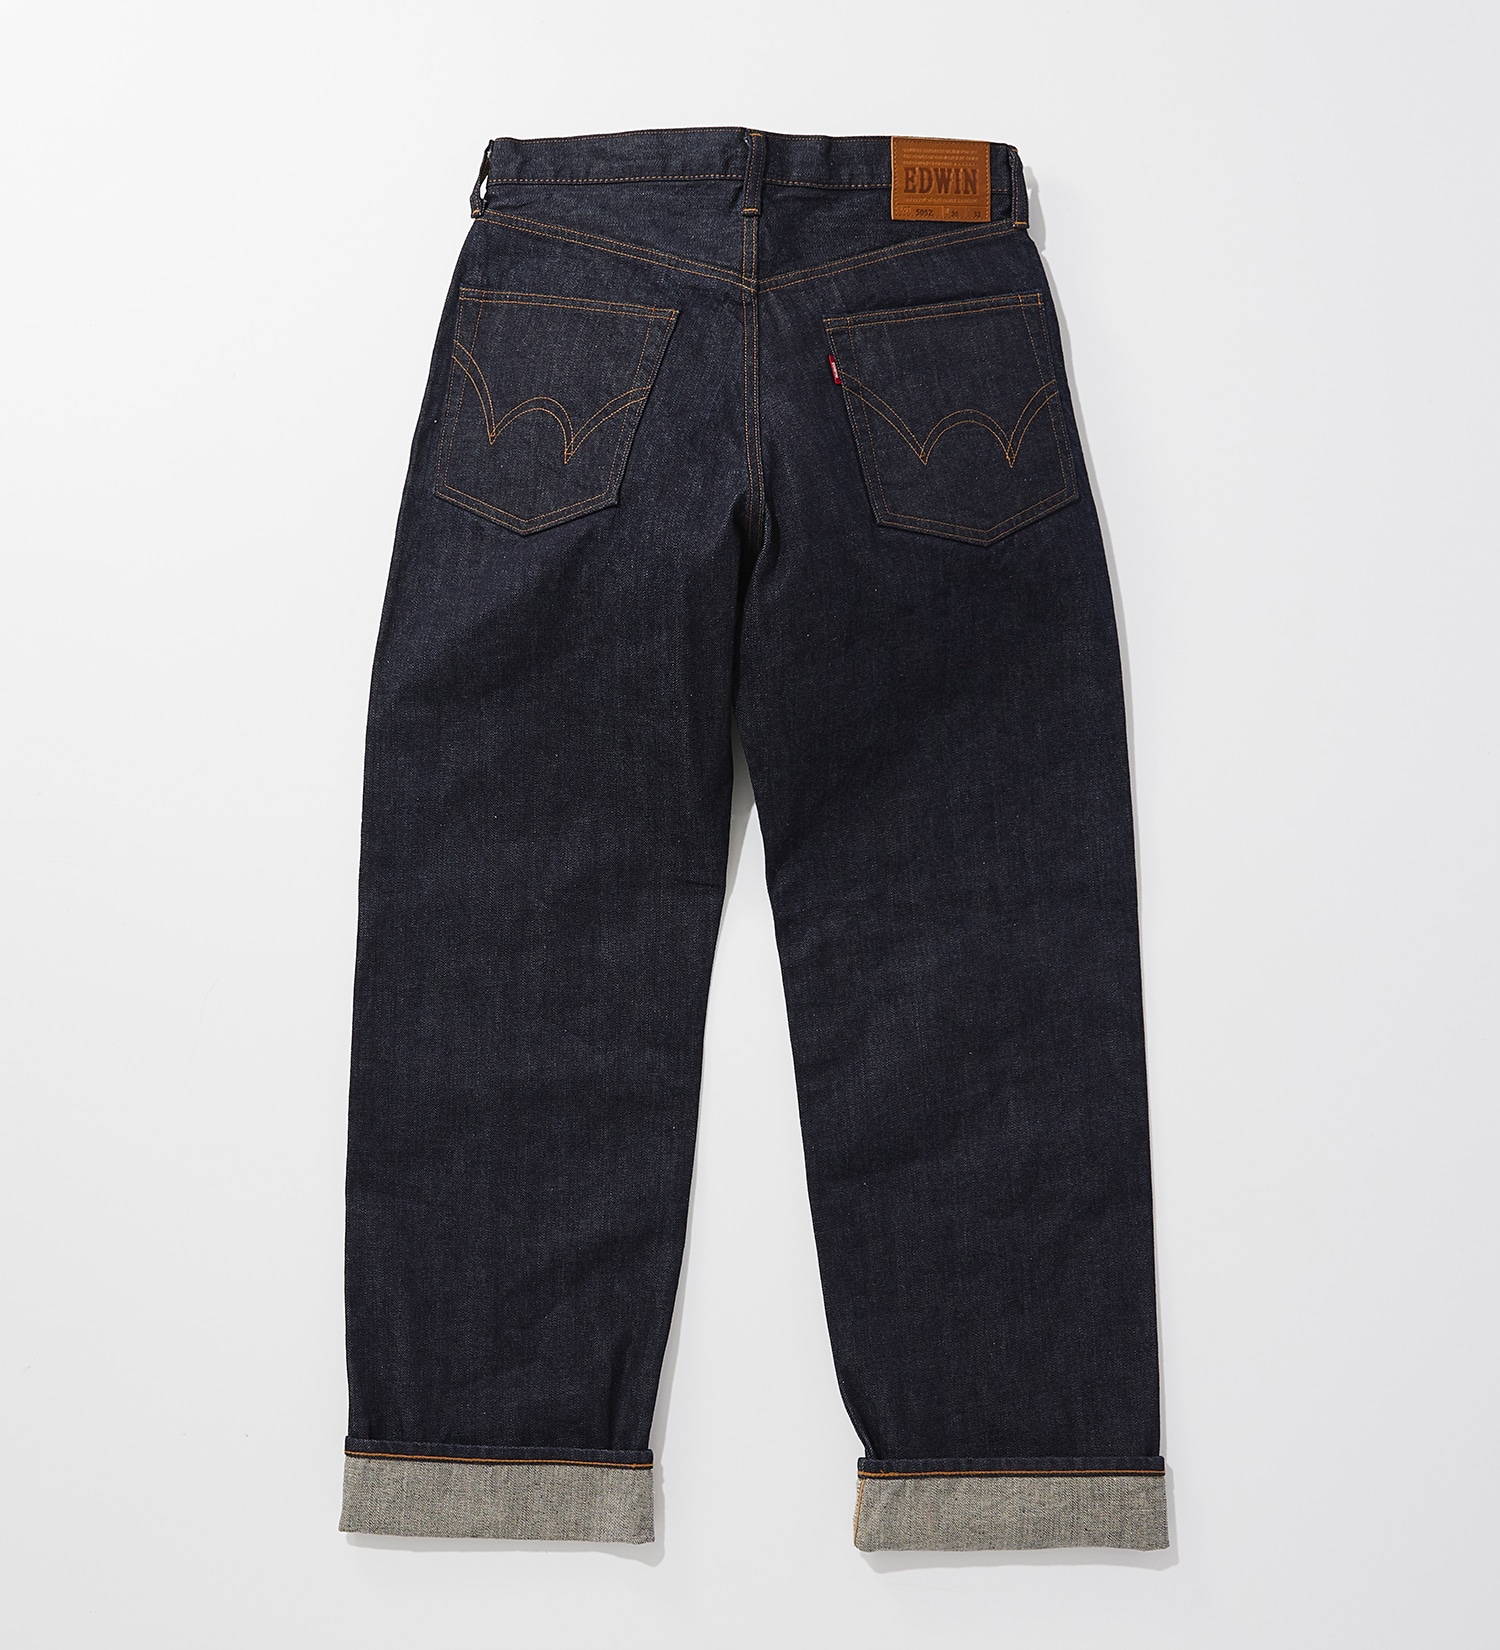 505Z ワイドストレートパンツ SELVAGE VINTAGE WIDE STRAIGHT MADE IN JAPAN 日本製 セルビッチ